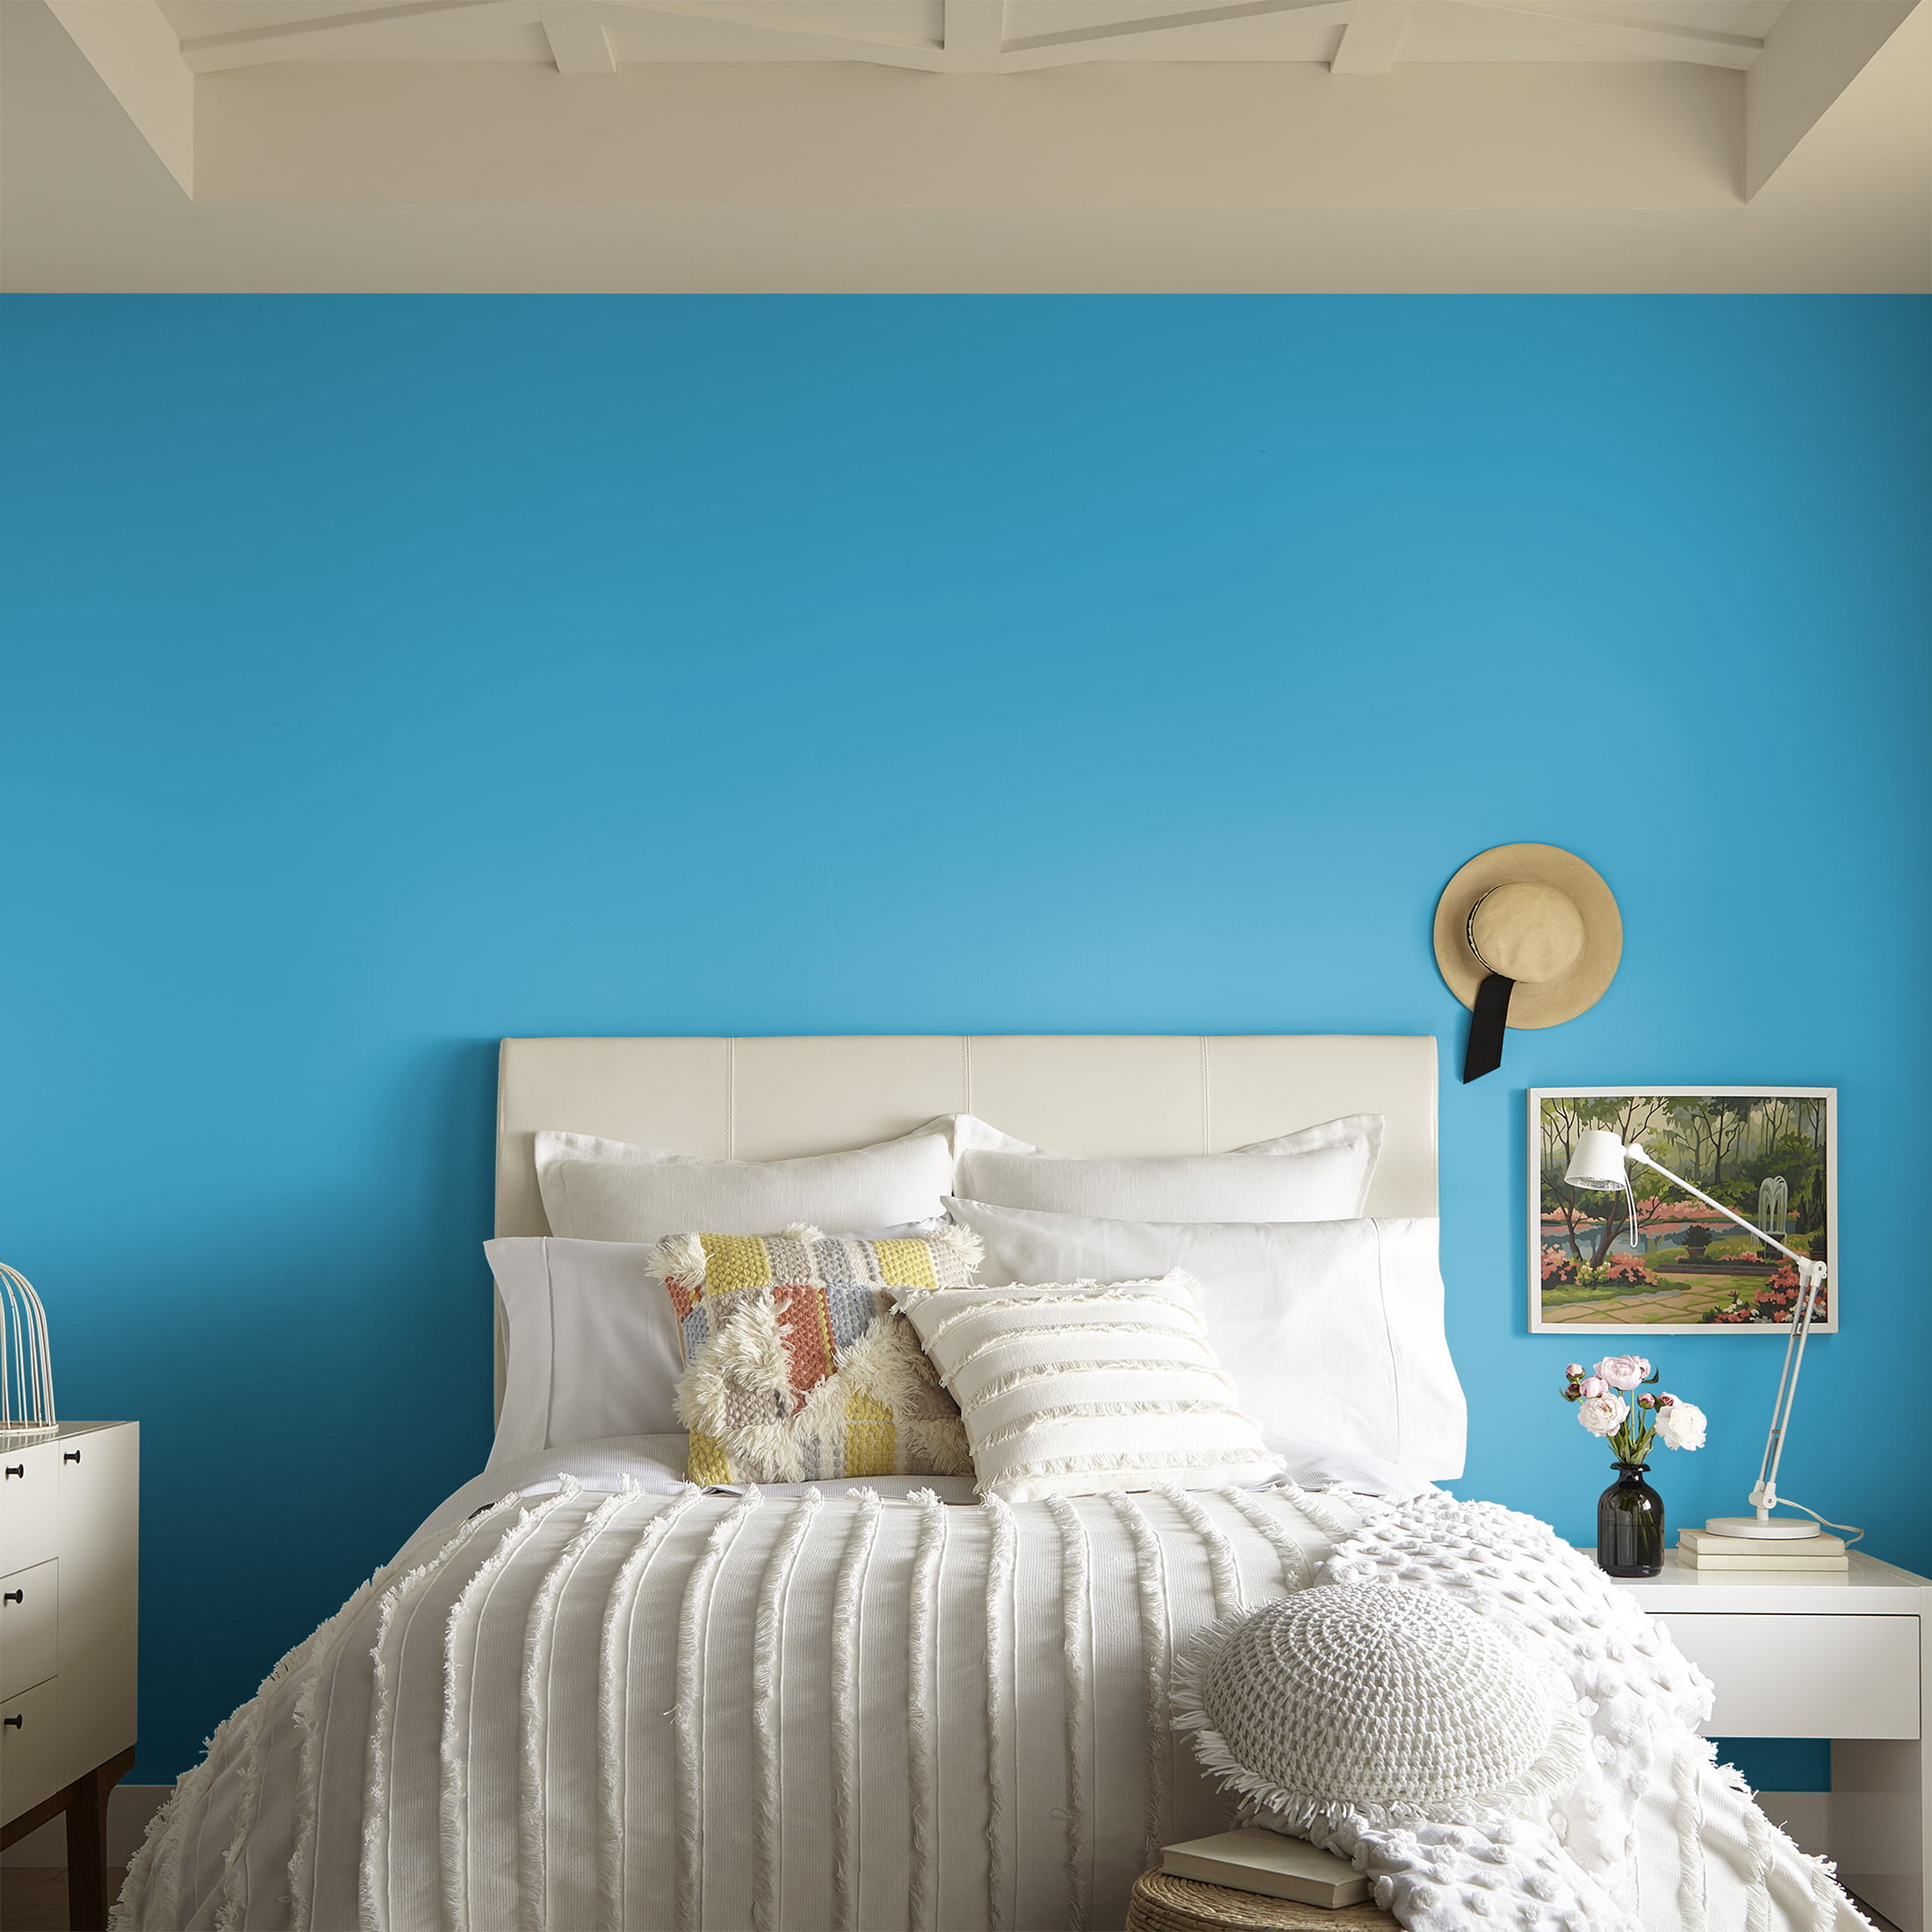 Asian Paints Feather Stencil Wall Paint Imperial Blue